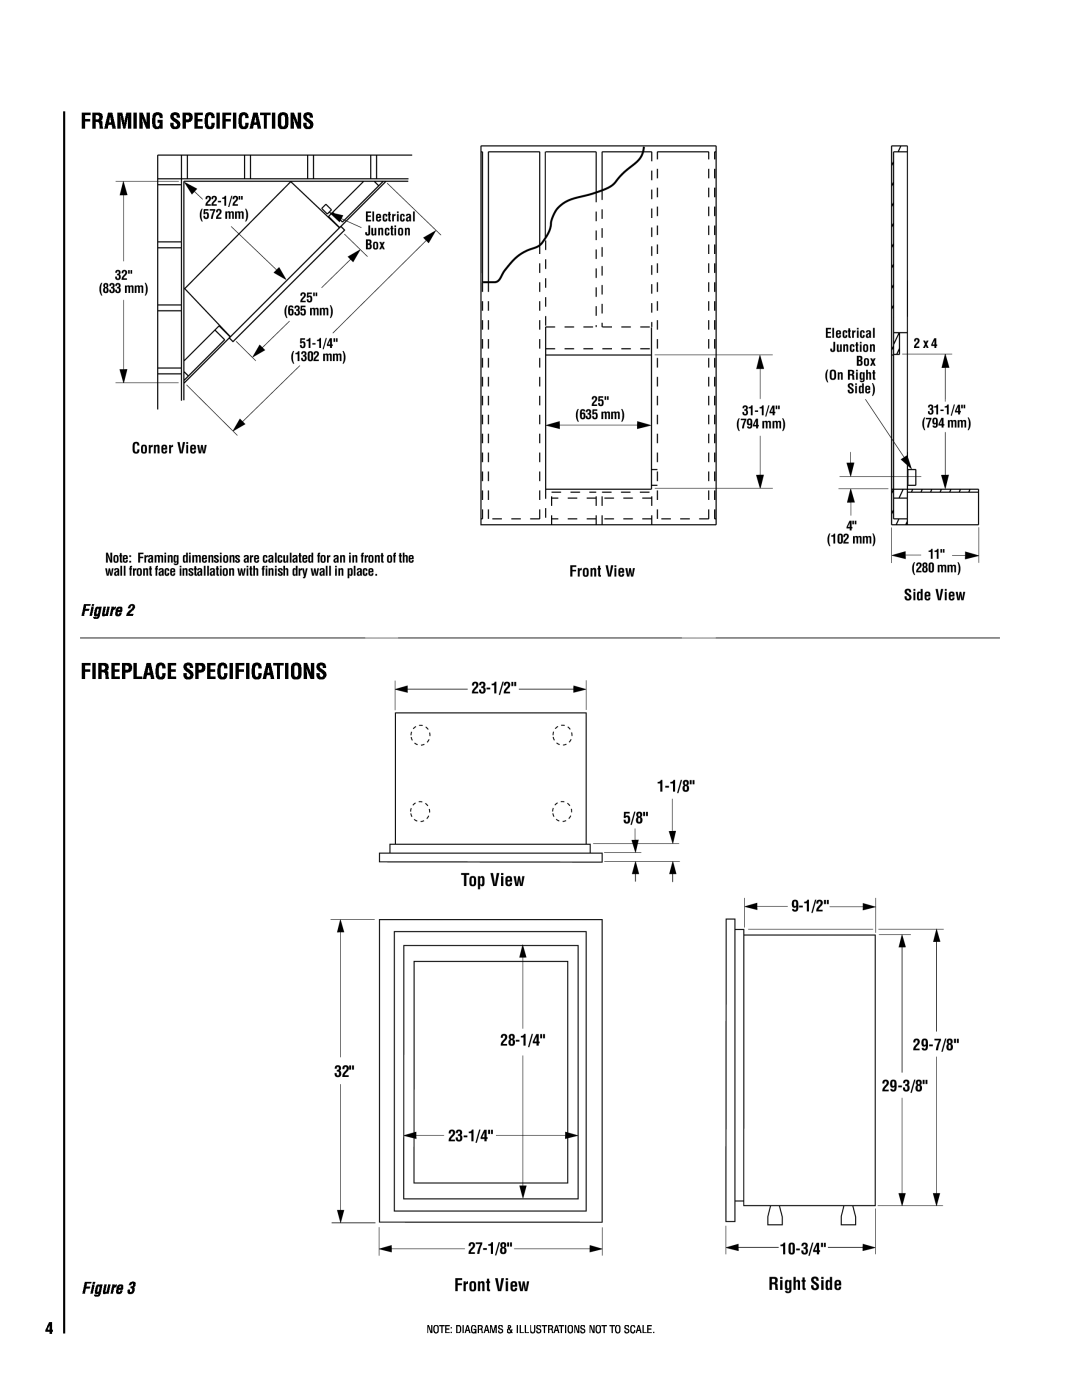 Lennox Hearth MPE-27 Framing Specifications, Fireplace specifications, Top View, Right Side, Junction Box, 635 mm, 51-1/4 